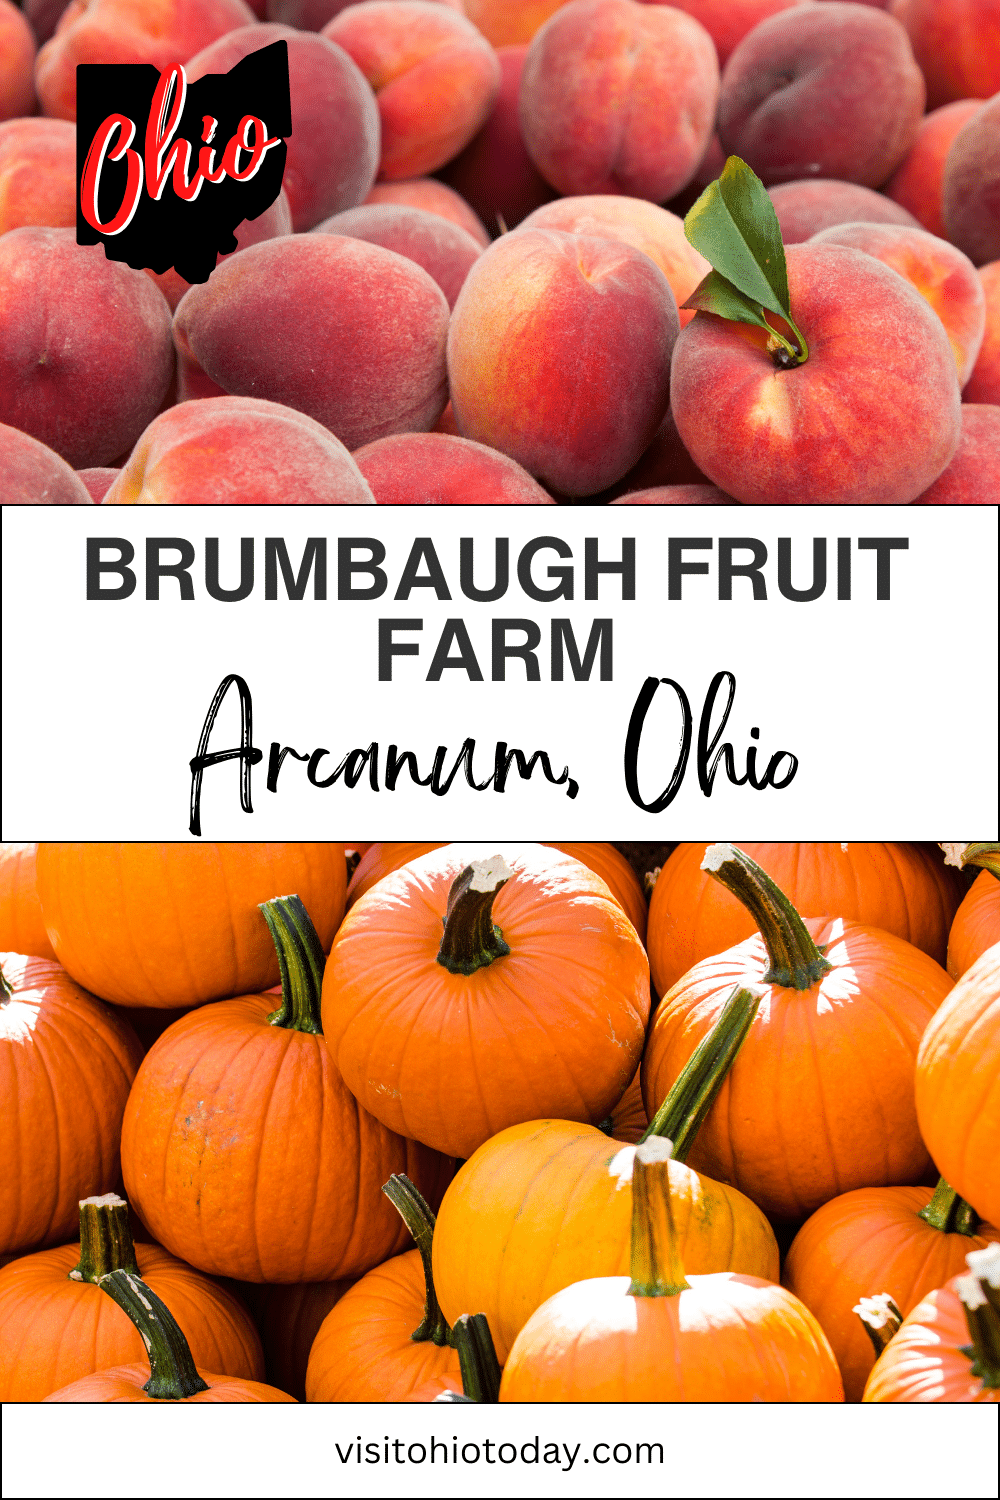 vertical image with a photo of a pile of peaches at the top, and a photo of orange pumpkins at the bottom. A white strip across the middle has the text Brumbaugh Fruit Farm Arcanum Ohio. Images via Canva pro license